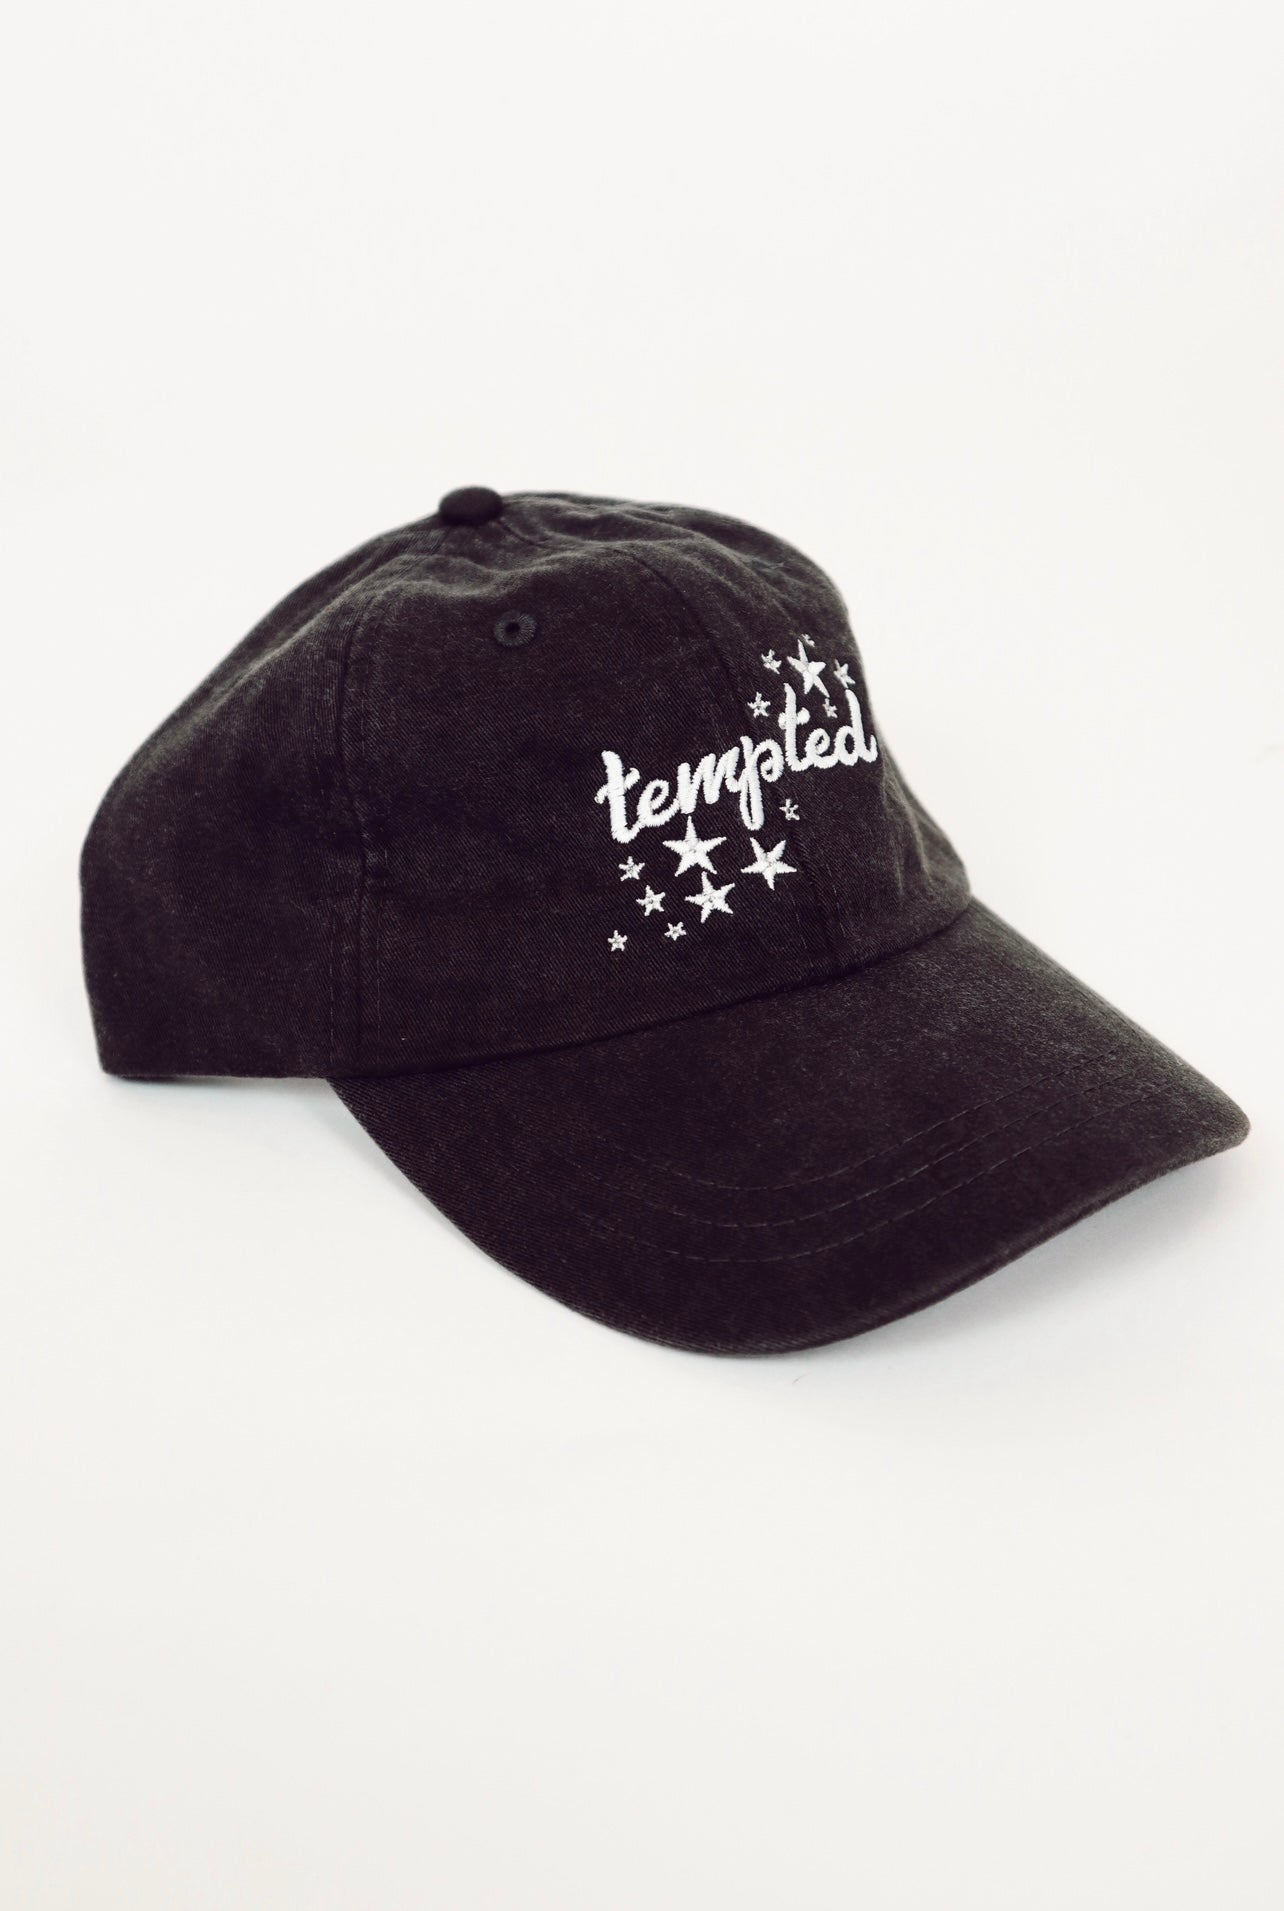 tempted star hat